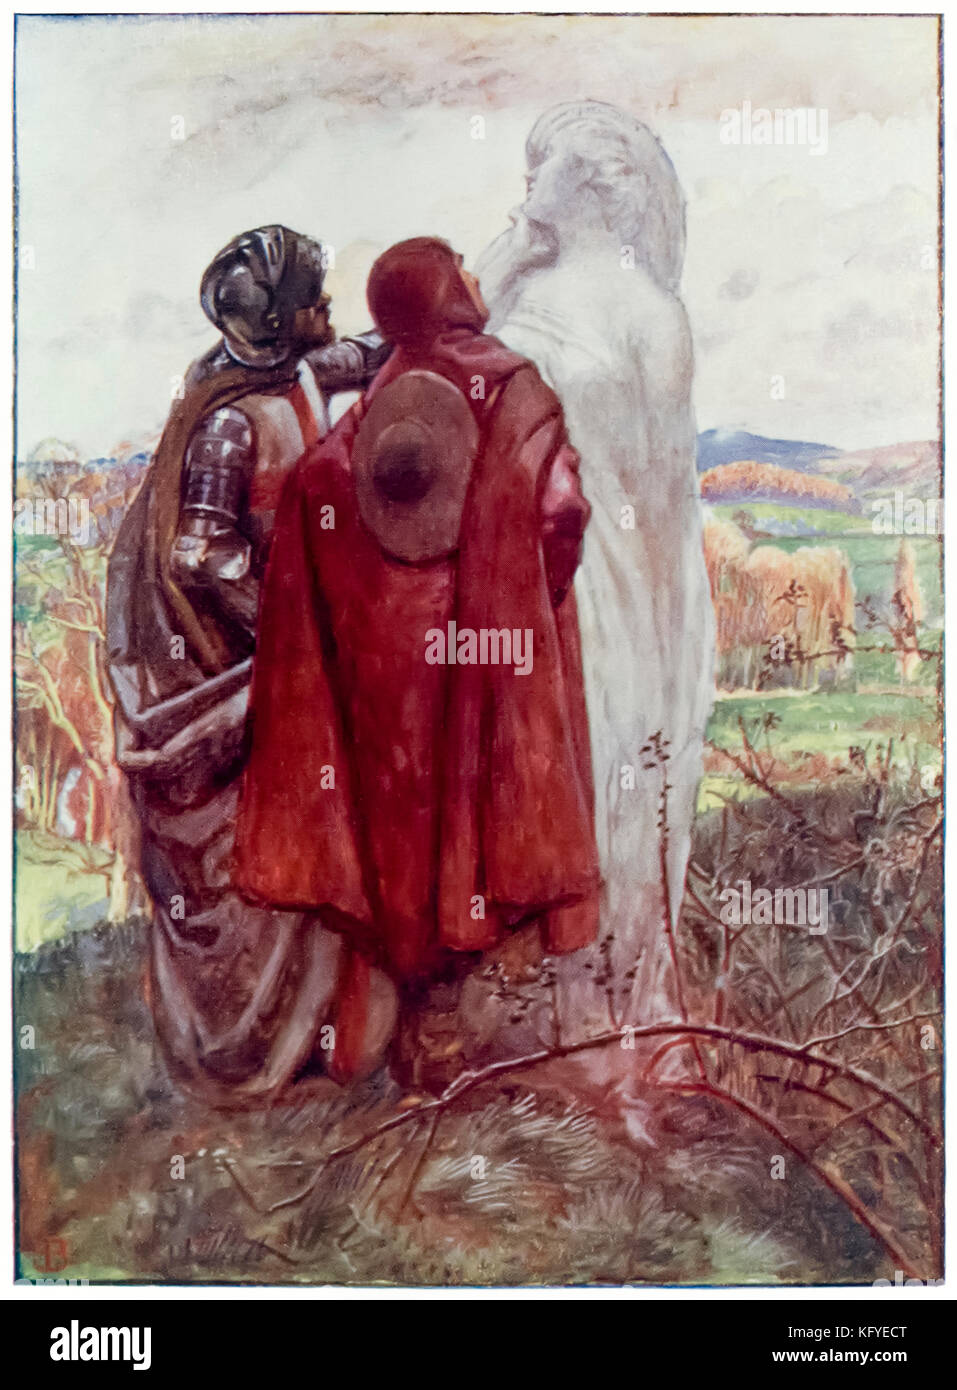 “Lot’s wife” from ‘The Pilgrim’s Progress From This World, To That Which Is To Come’ by John Bunyan (1628-1688). Illustration by Byam Shaw (1872-1919), Christian and Hopeful find a statue of salt by the side of the highway.’ See more information below. Stock Photo